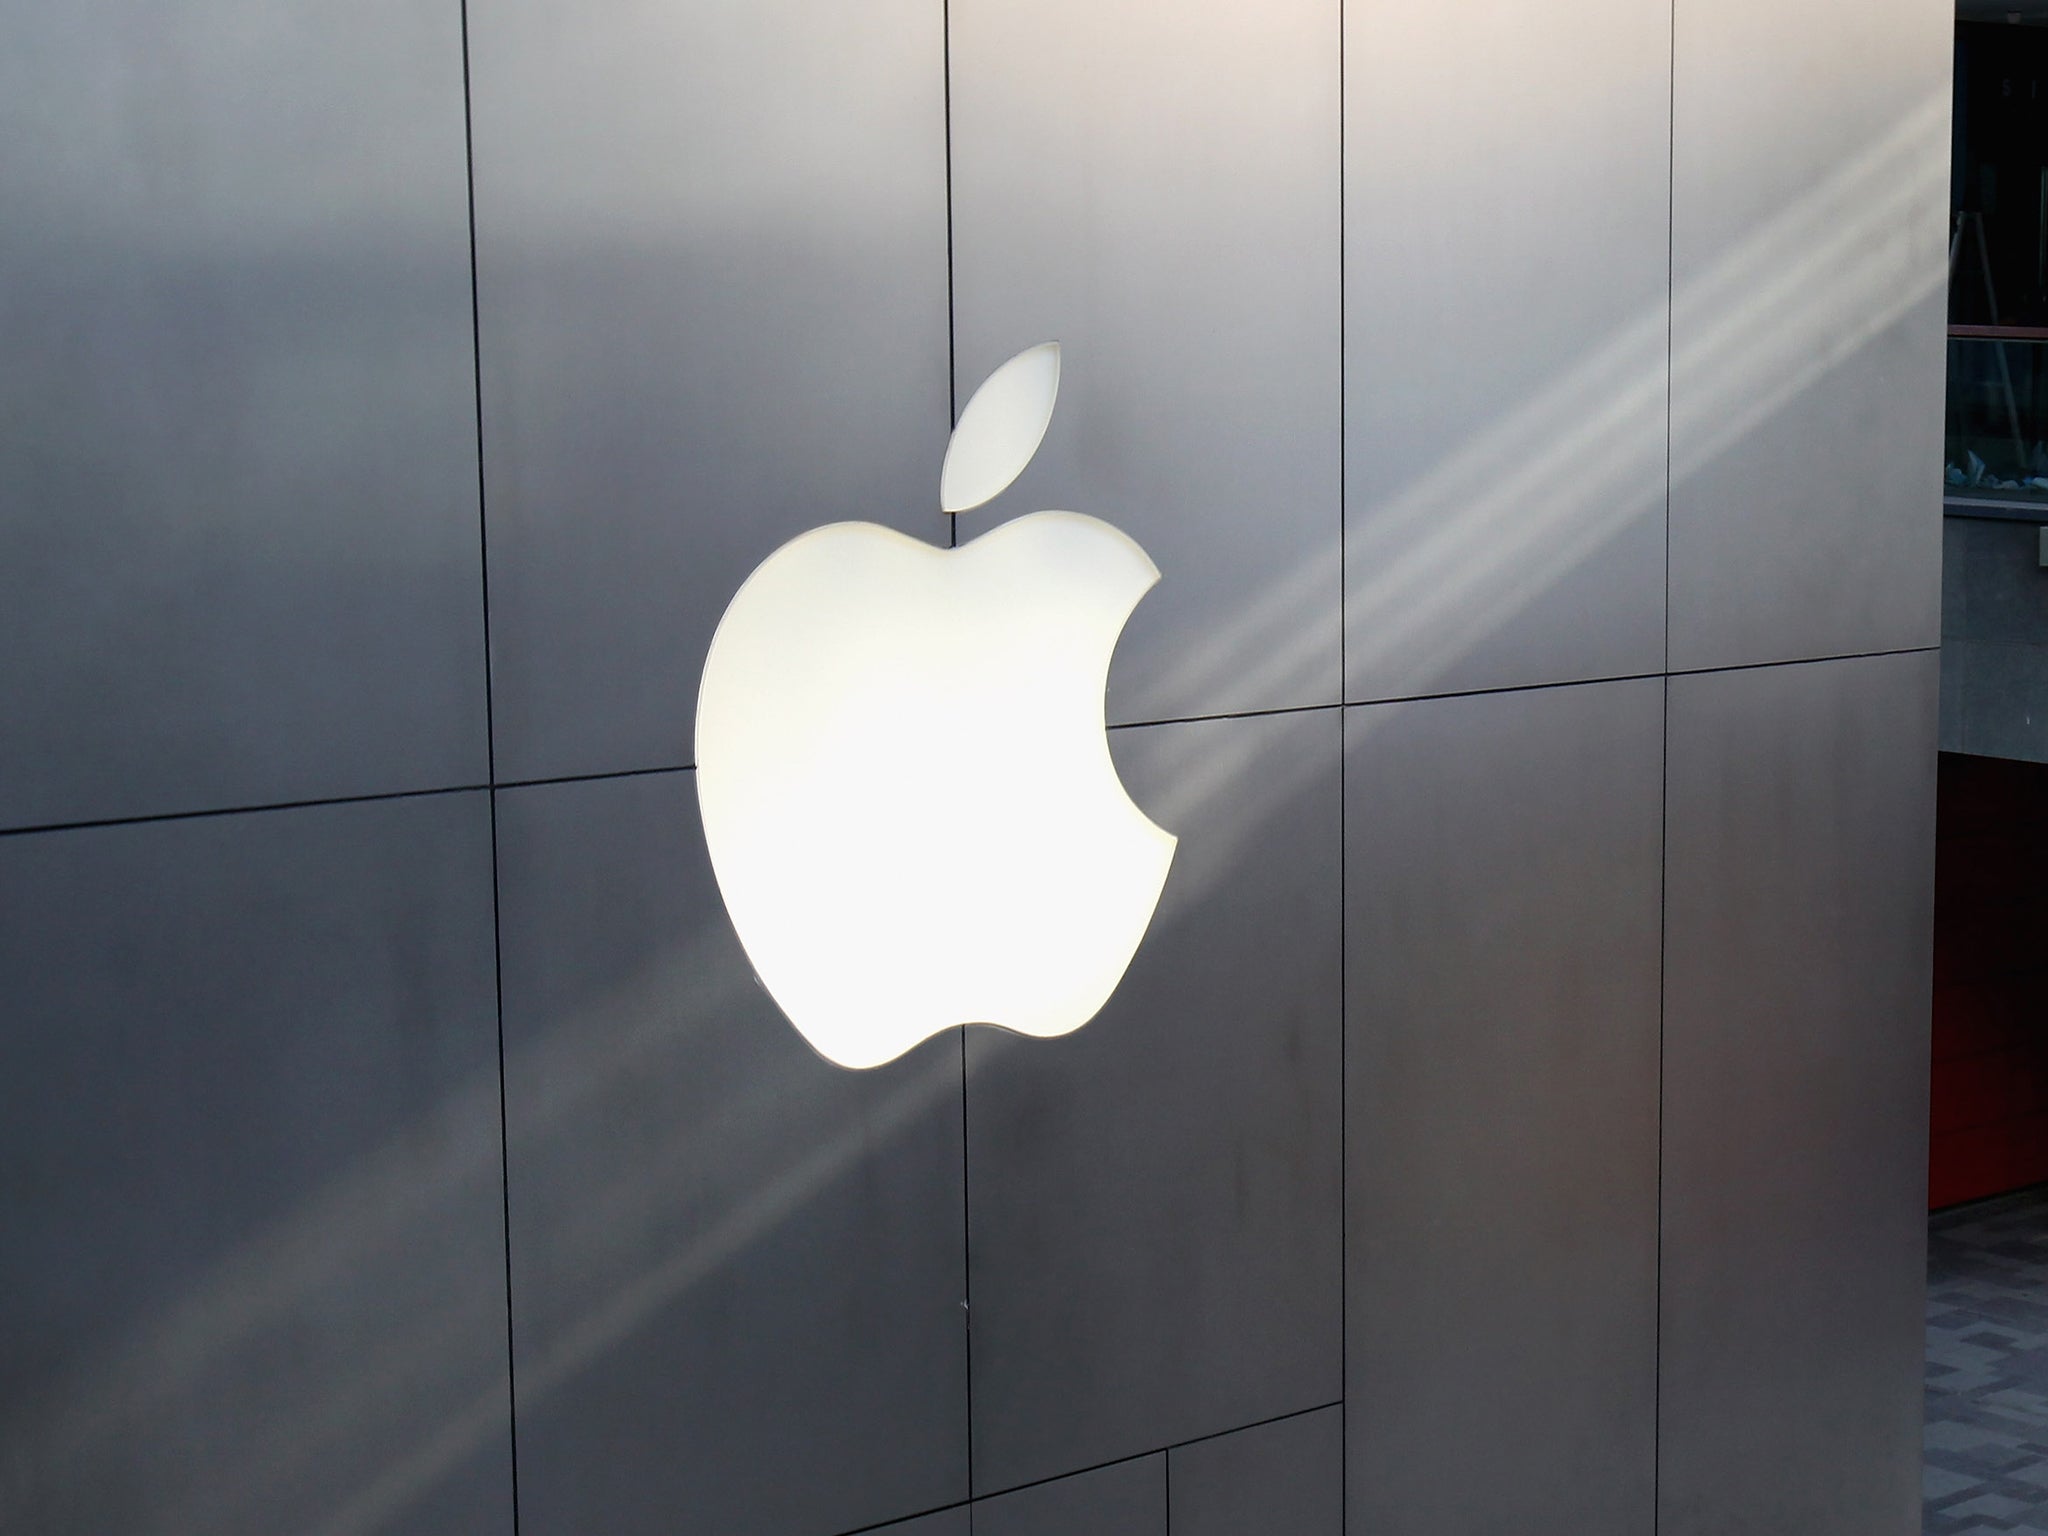 It is not yet clear whether Apple intends to produce its own films as well as television series